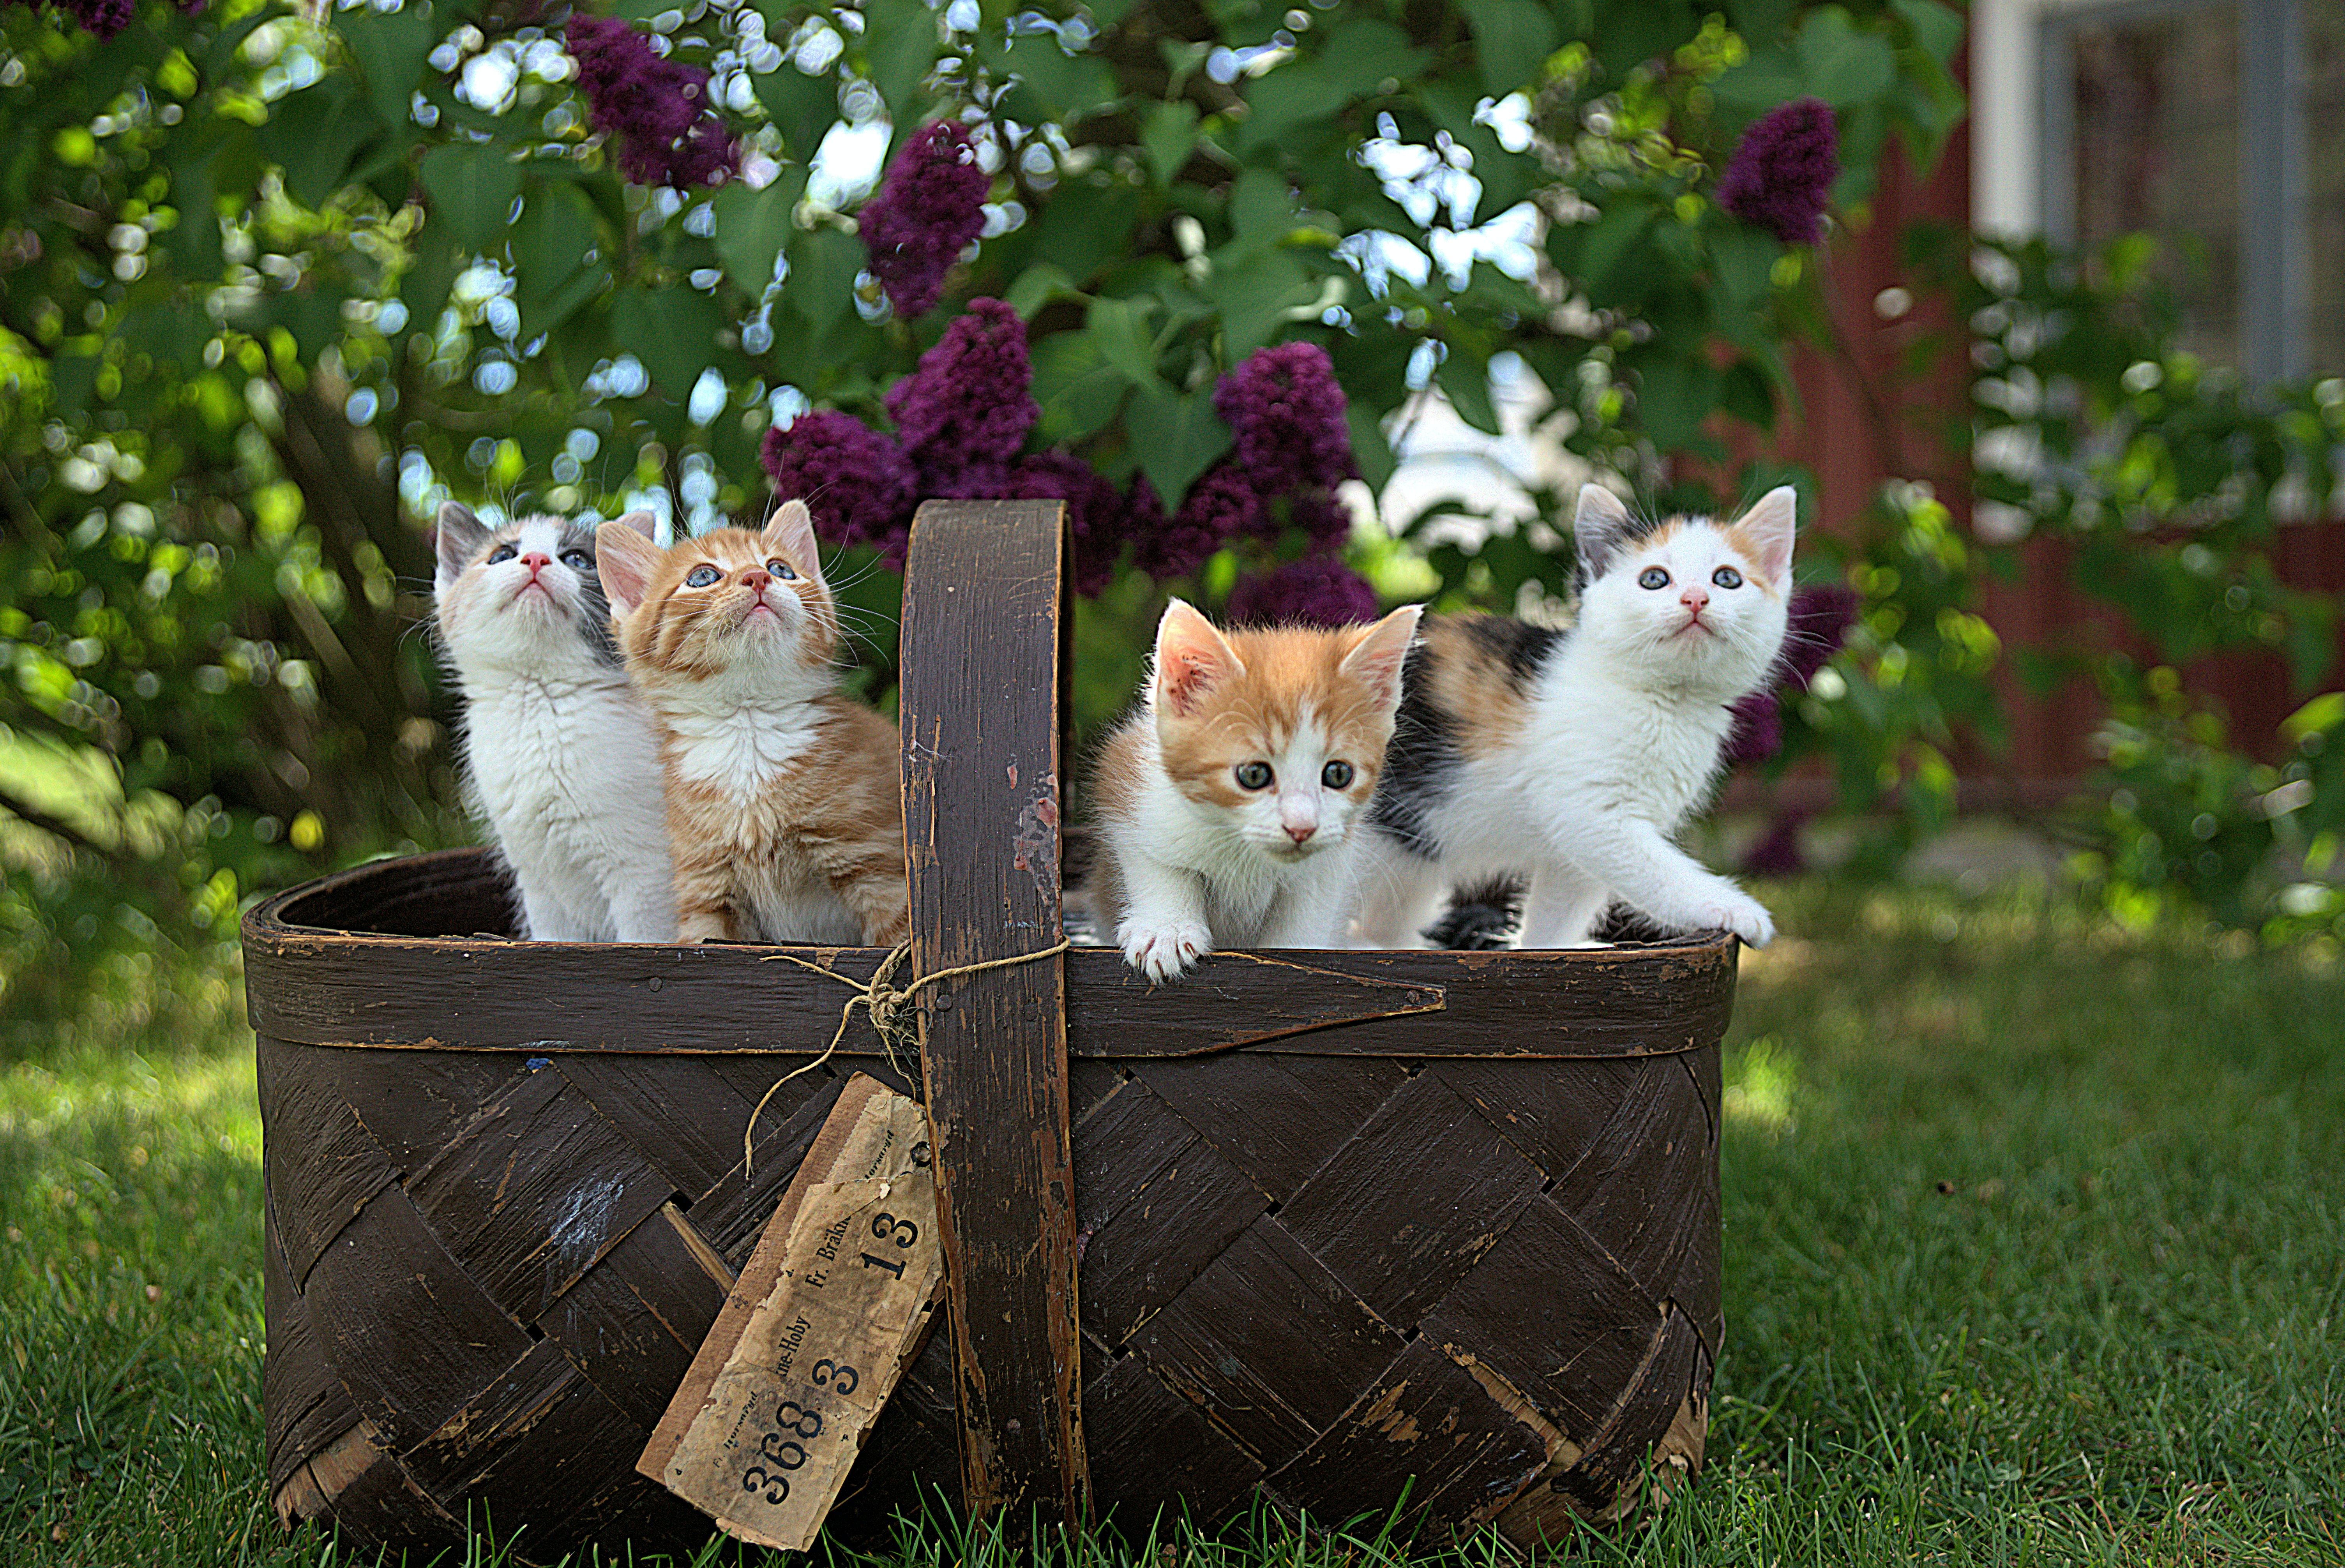 Four small cats sitting in the wooden basket outside